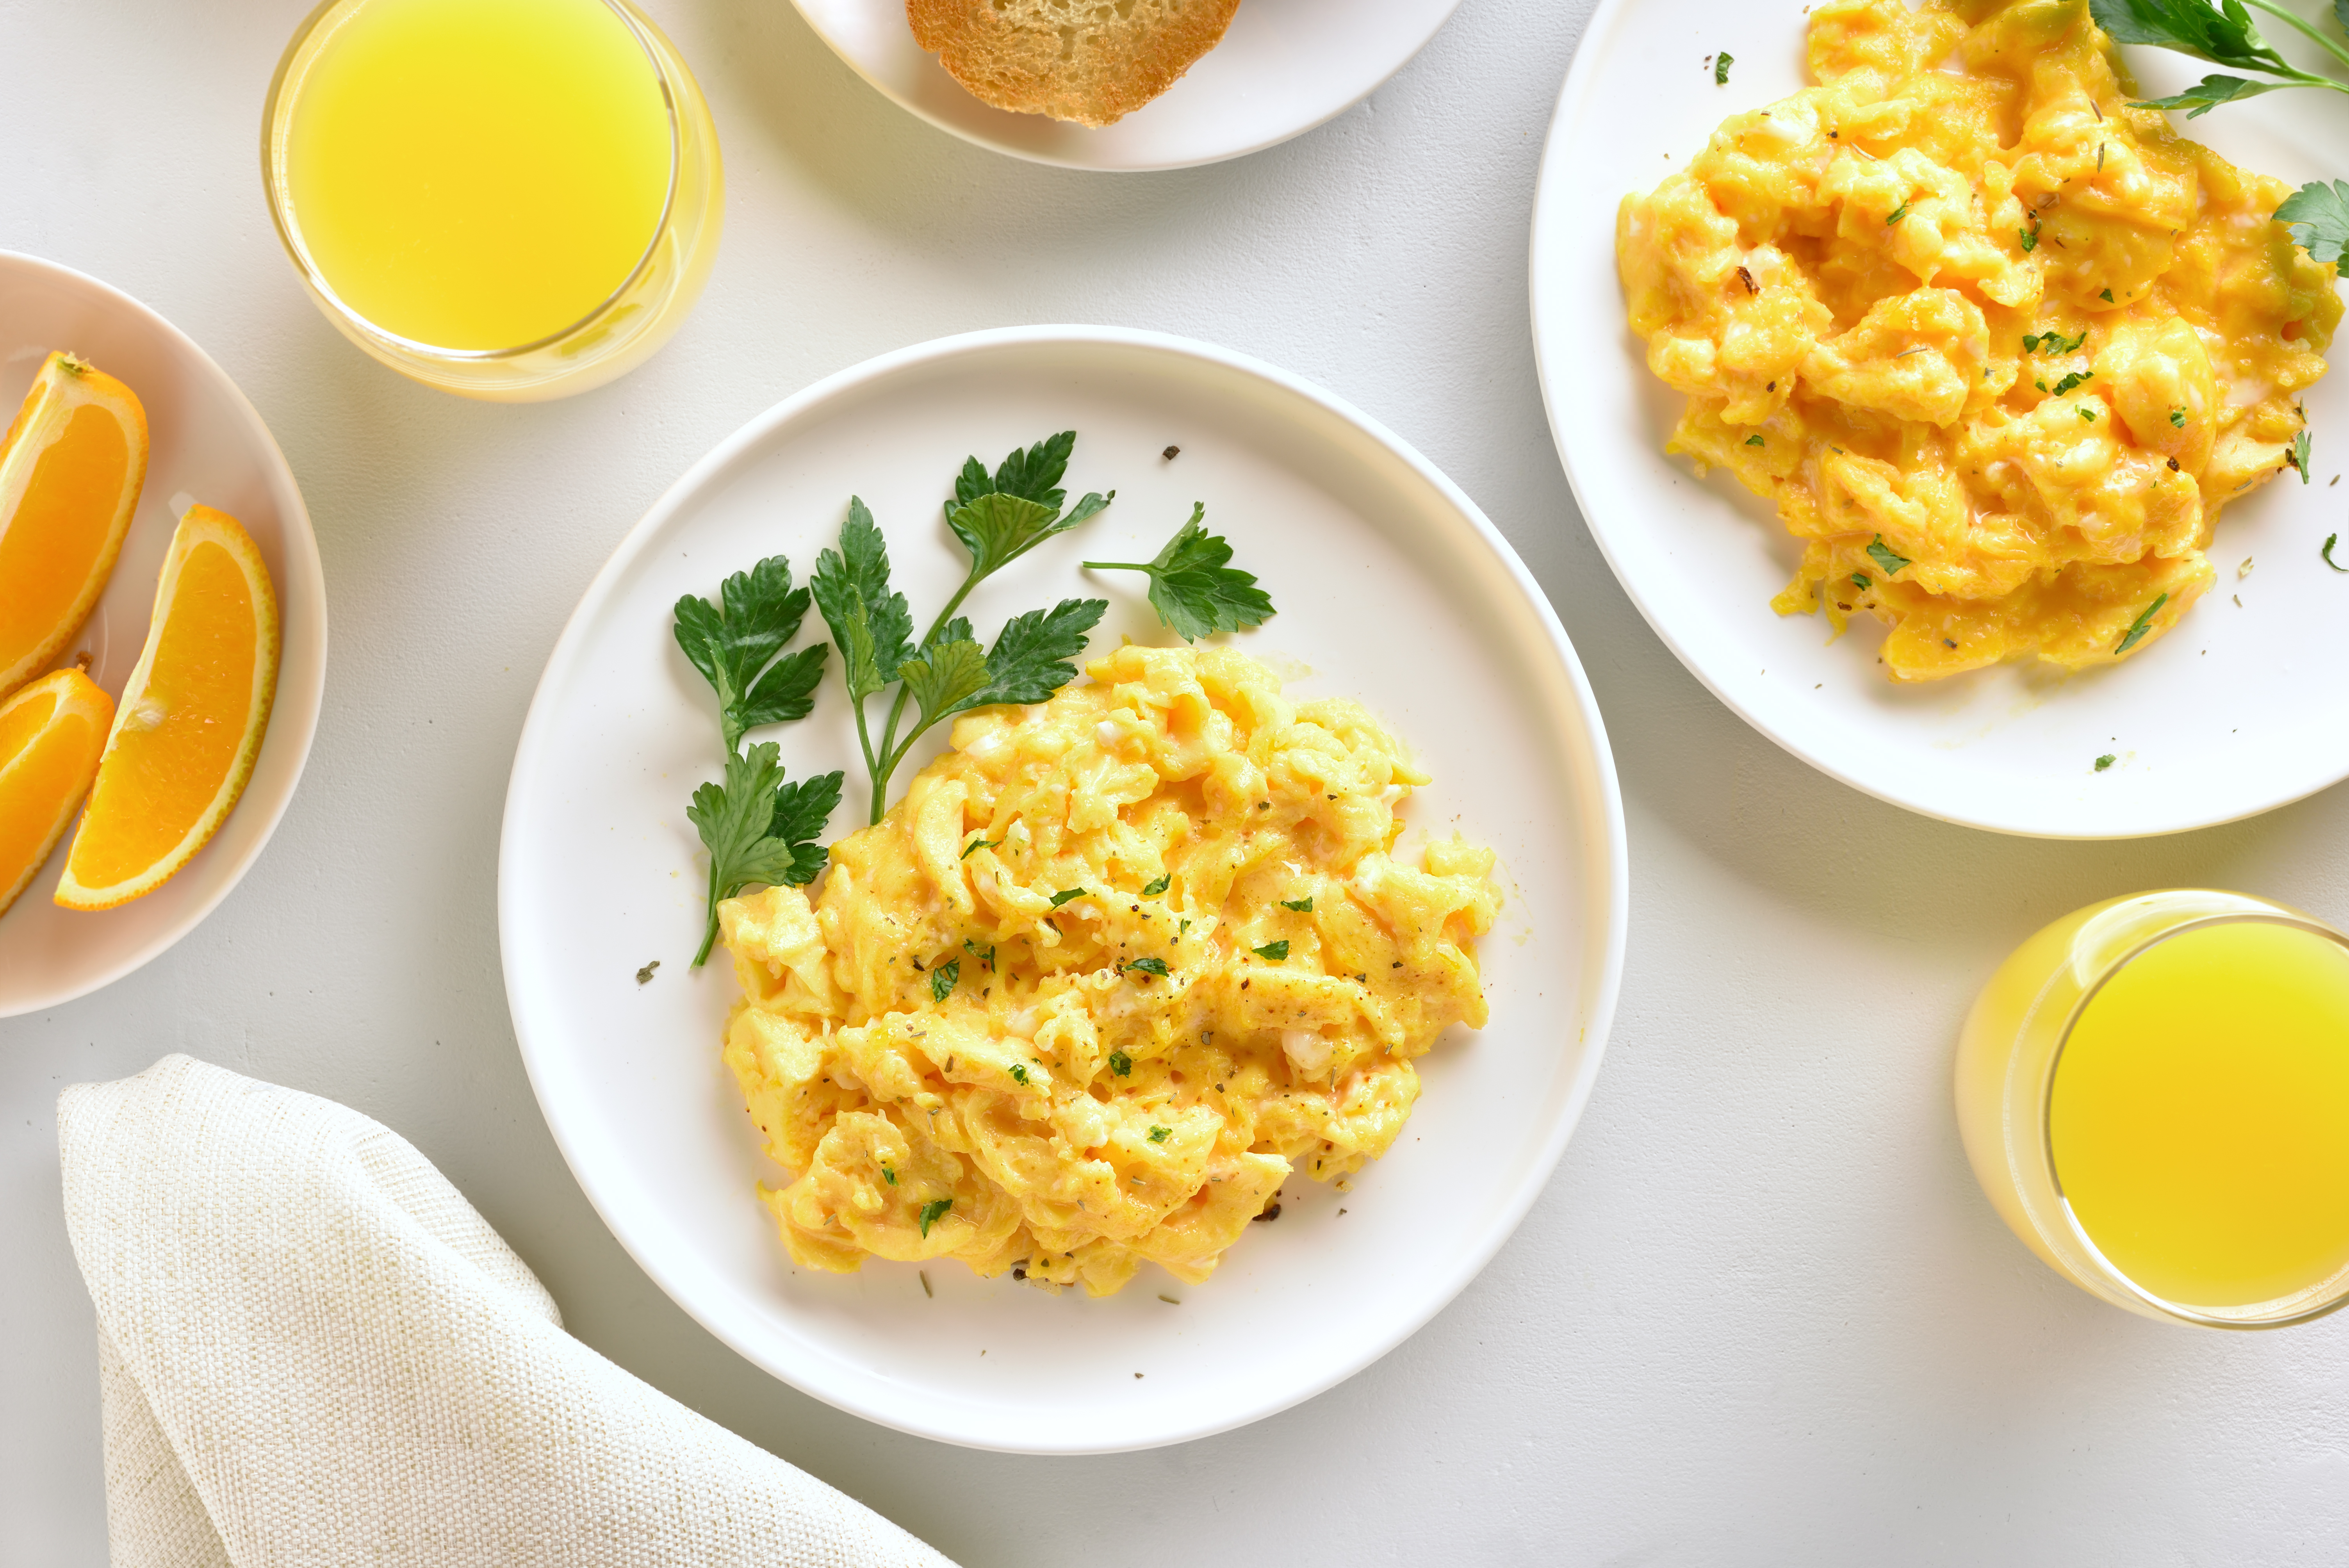 Healthy diet breakfast concept. Scrambled eggs and orange juice over white stone background. Top view, flat lay